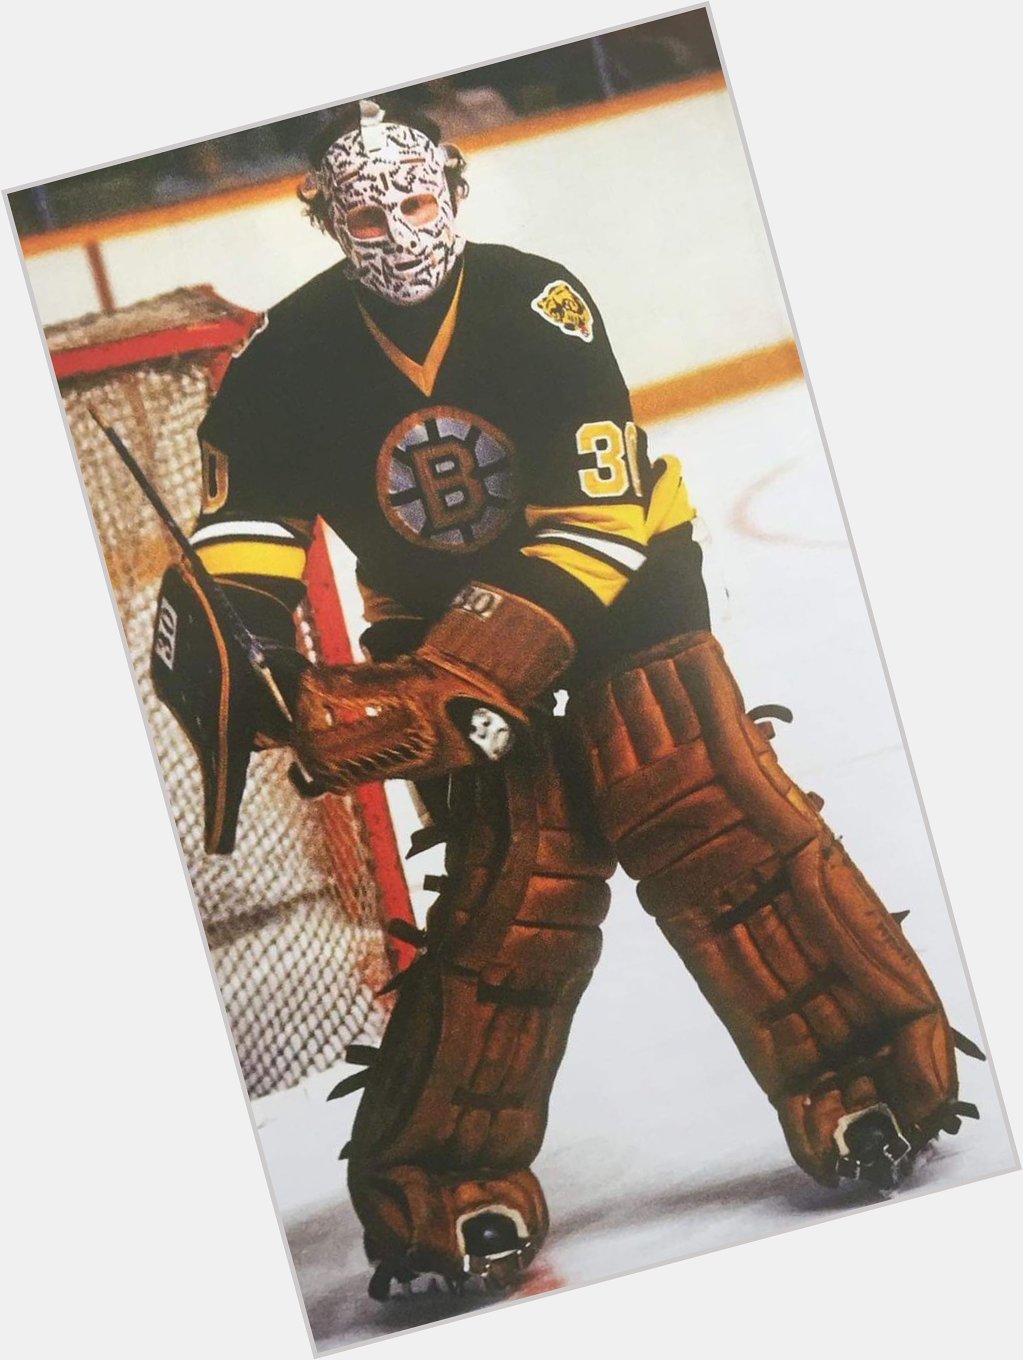 Happy birthday to Gerry Cheevers!

One of the best masks in hockey history... 